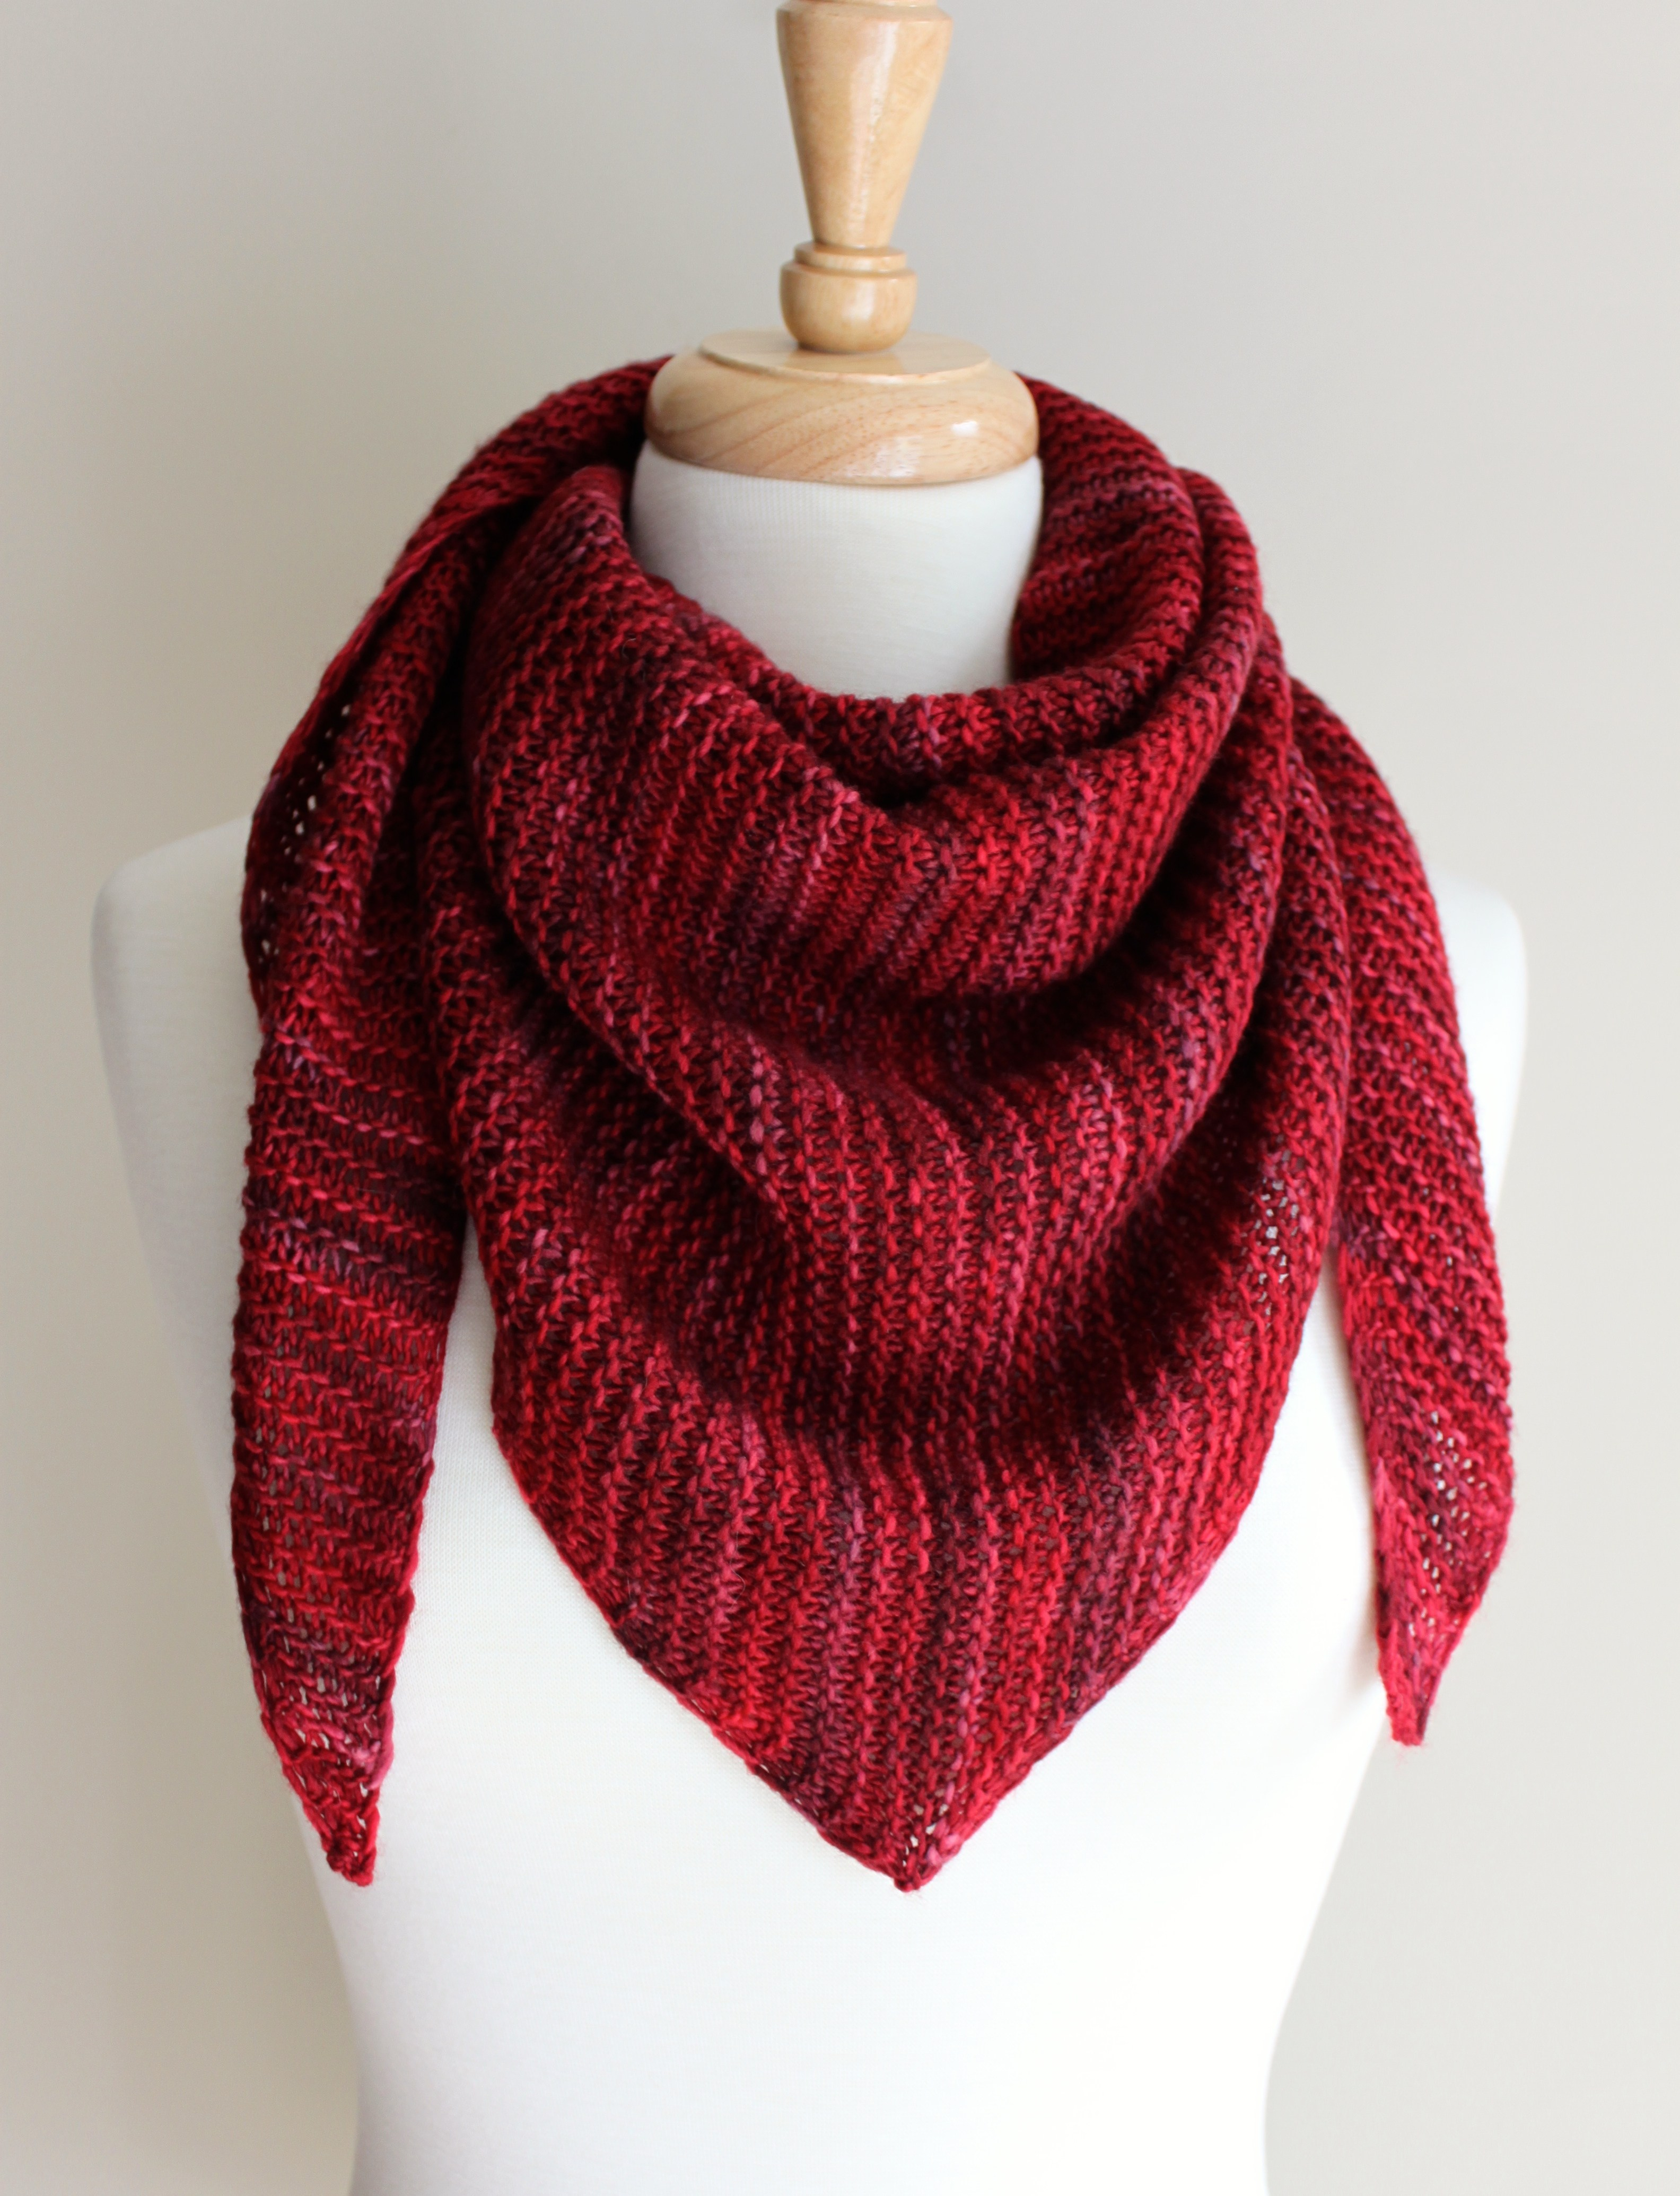 Knitting Patterns Designs Free Knitting Patterns Truly Triangular Scarf Leah Michelle Designs